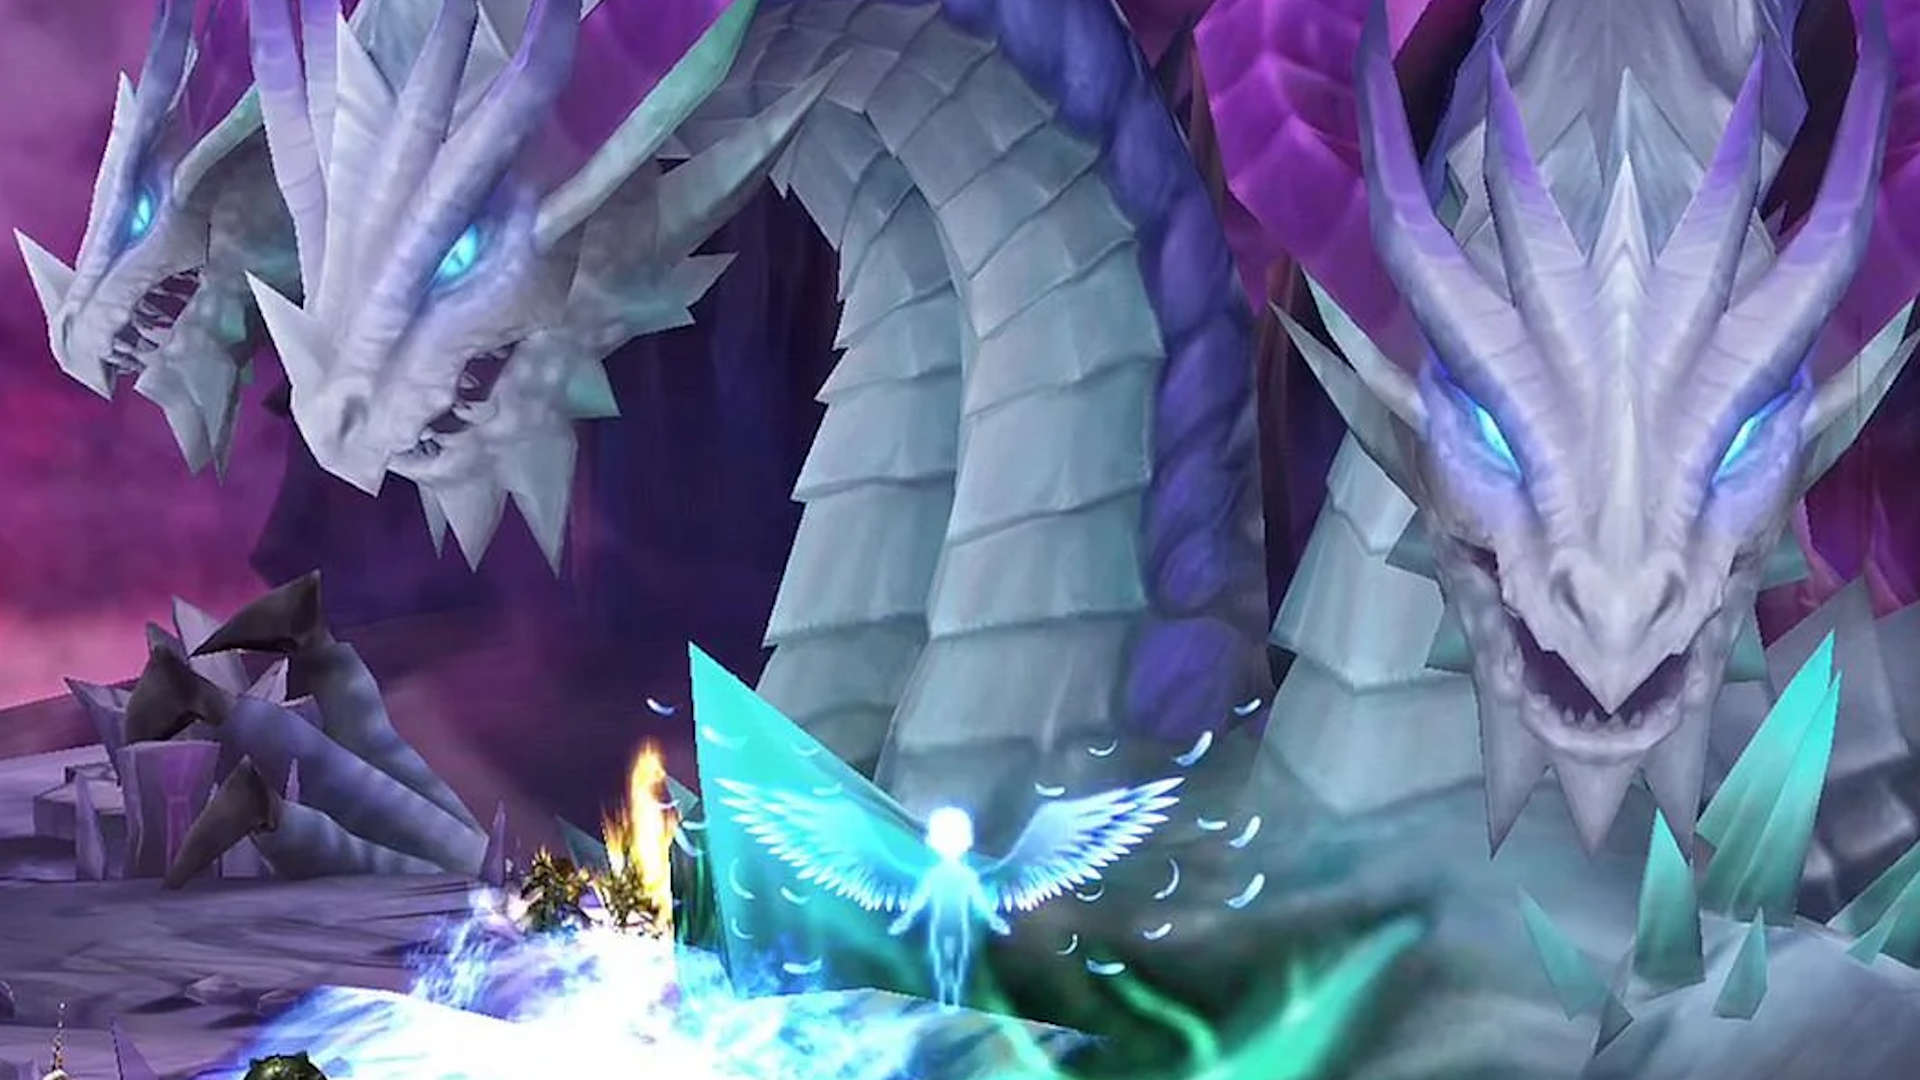 Best gacha games: Summoners War. Image shows a large three headed dragon.